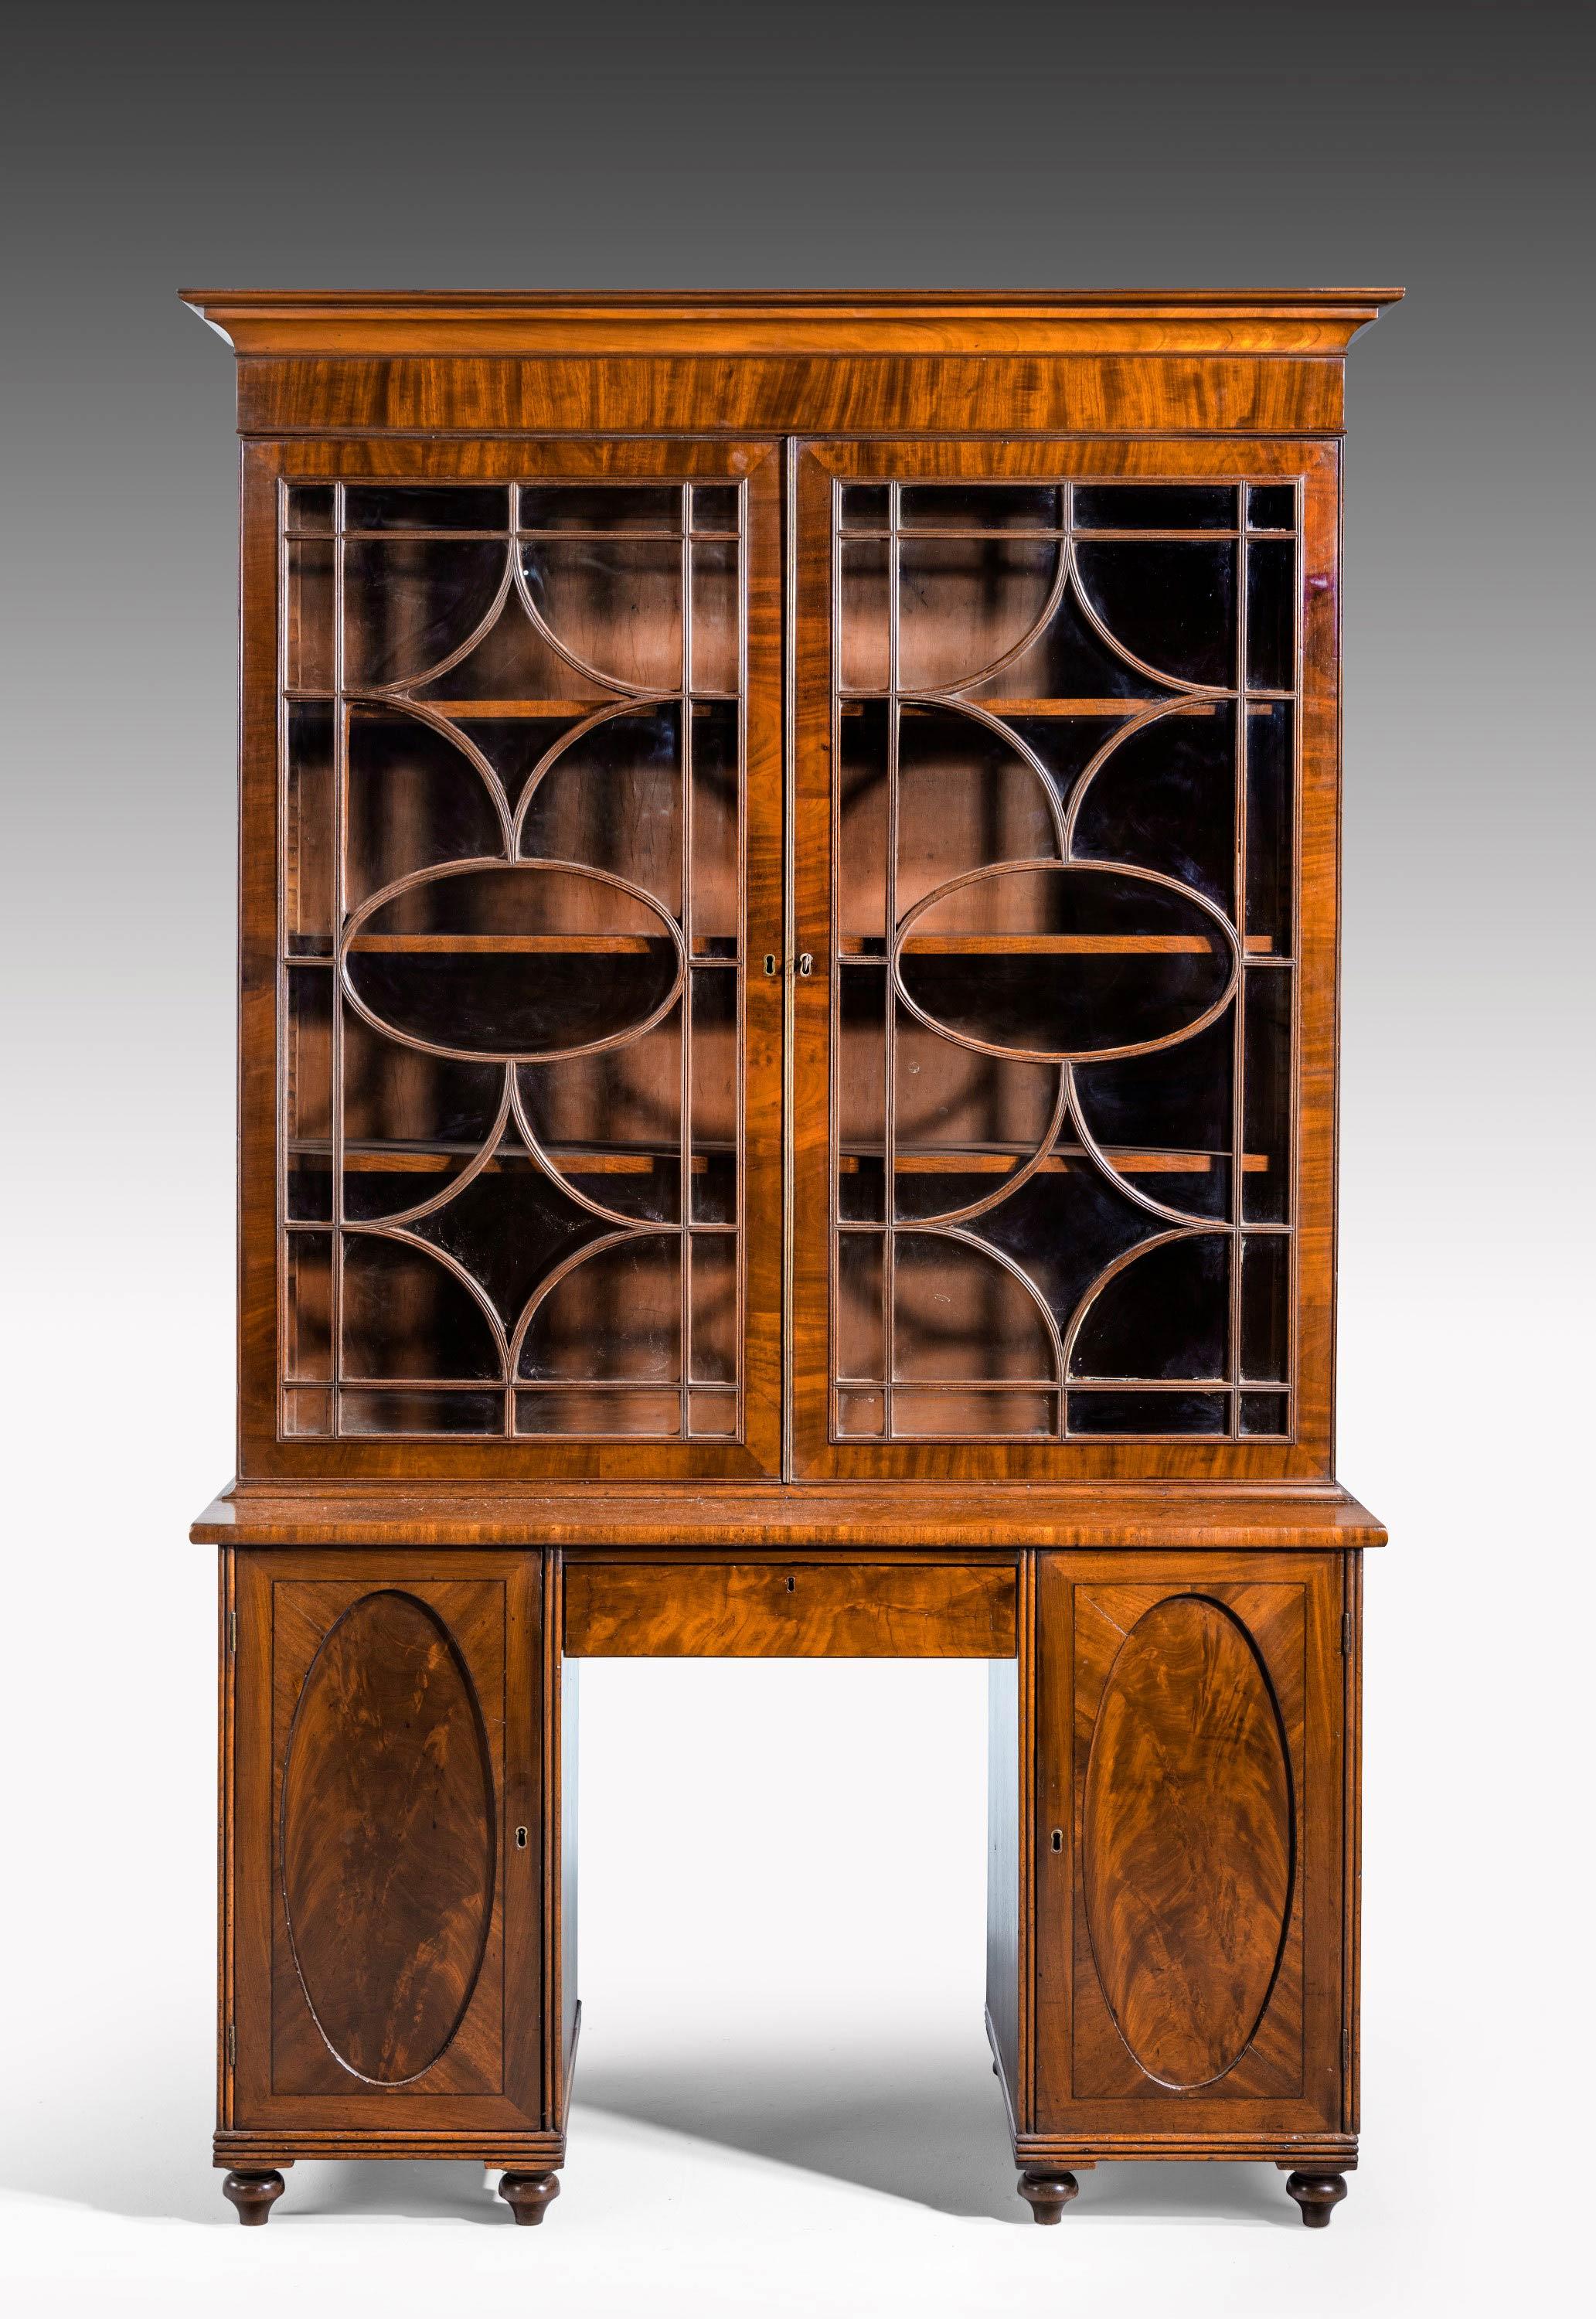 An unusual George III period mahogany bookcase, the base section with a kneehole. Original astragal glazing